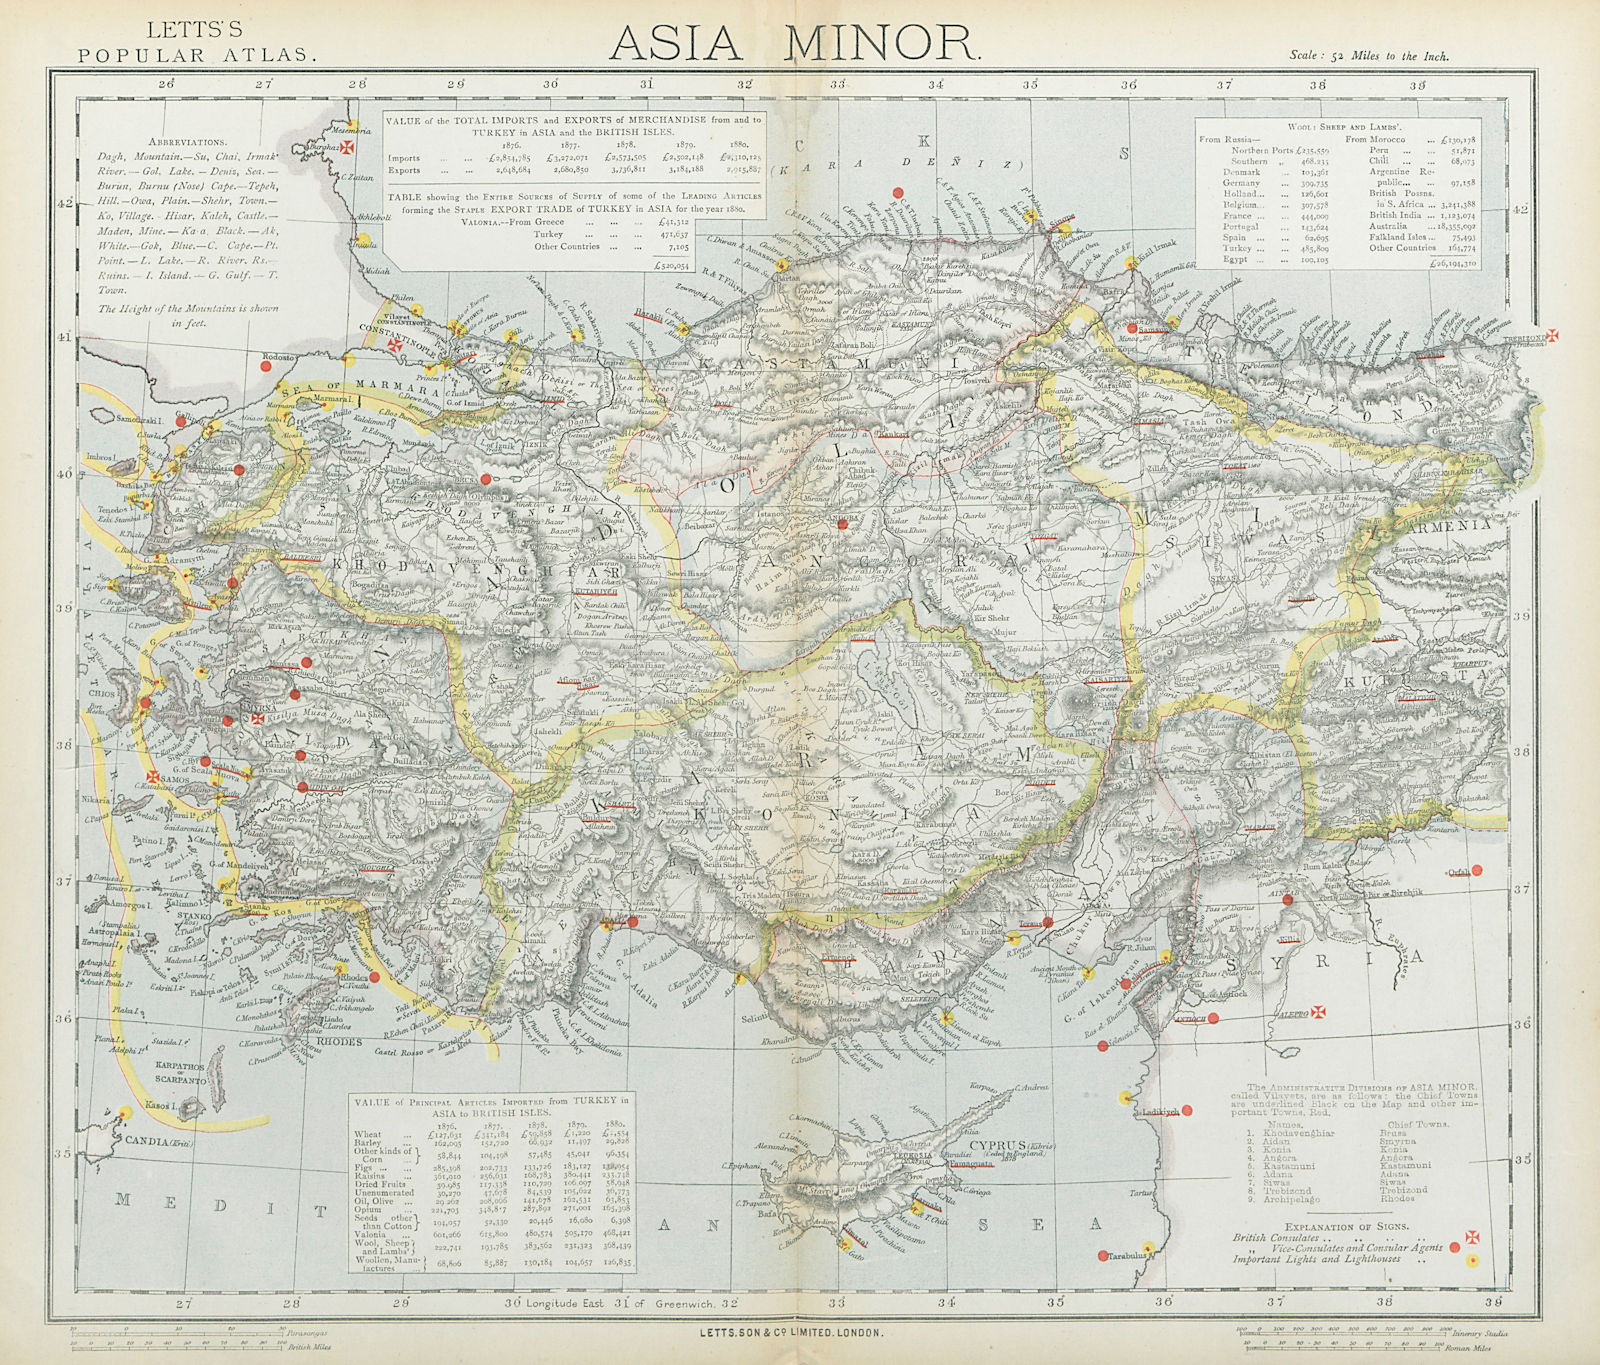 Associate Product TURKEY. Asia Minor vilayets. Dodecanese. British Consuls. Cyprus. LETTS 1883 map